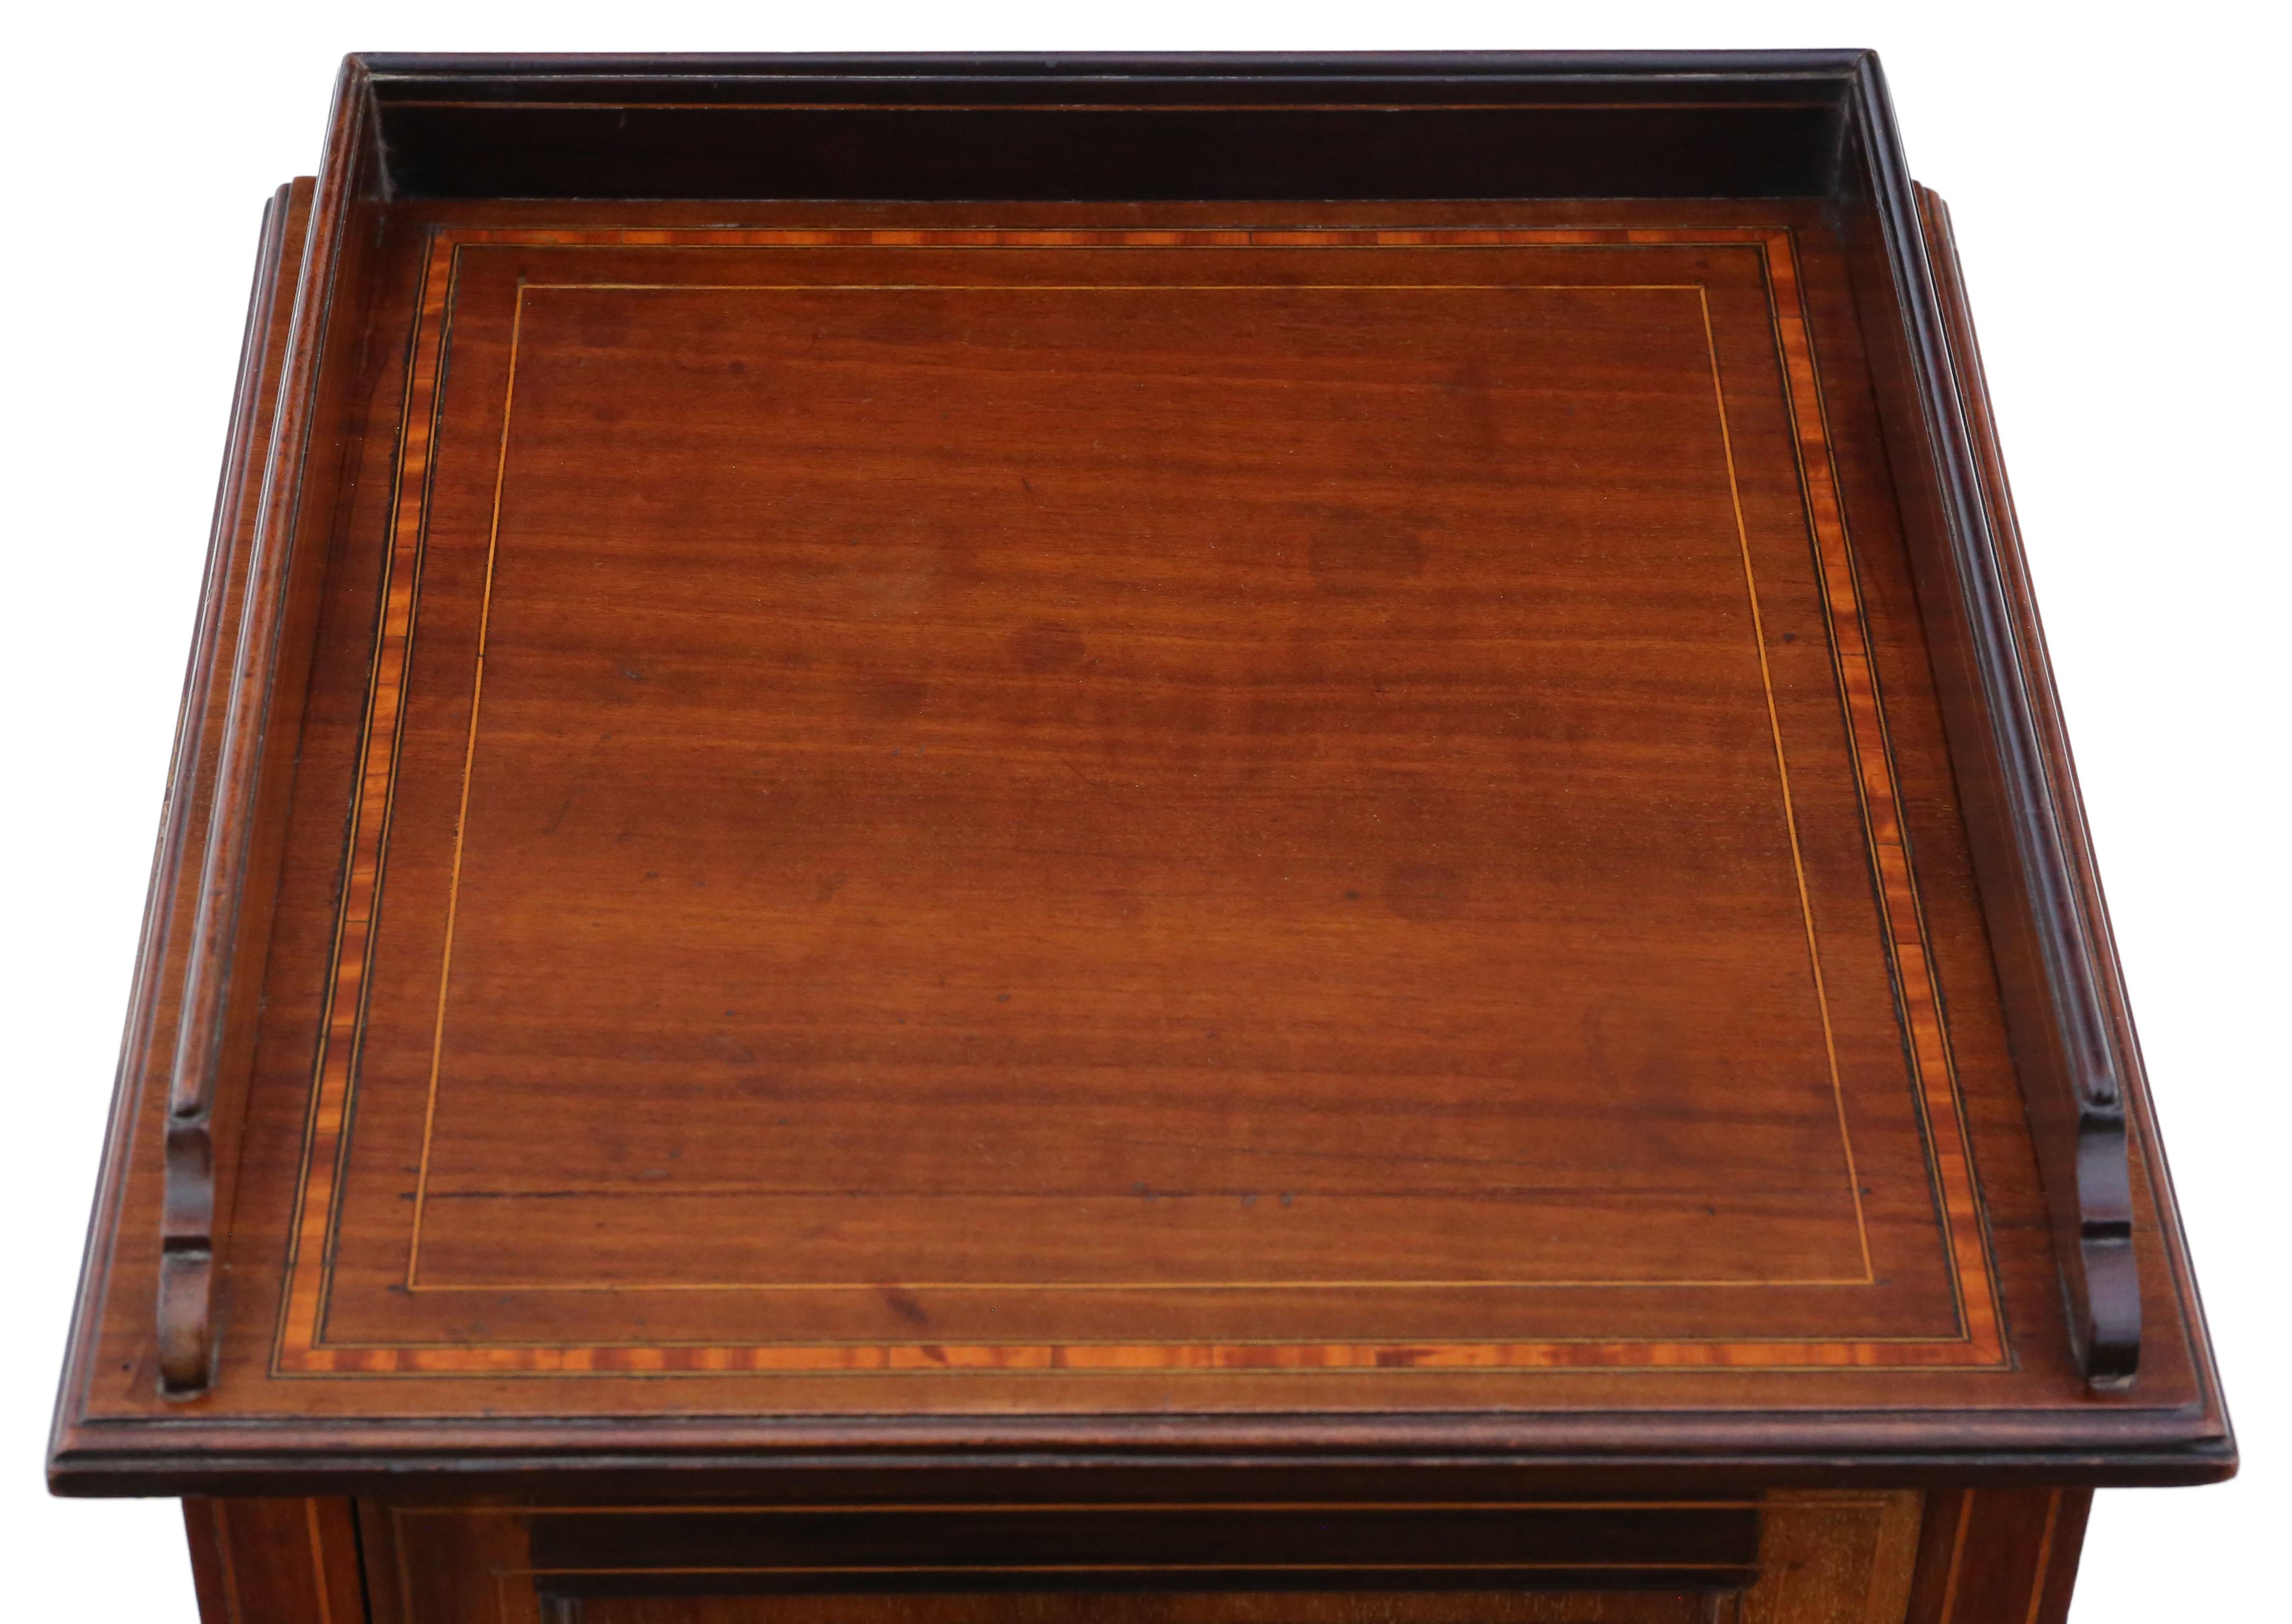 Antique fine quality Edwardian Georgian revival tray top inlaid mahogany bedside table cupboard, circa 1905.

A fantastic piece with quality and style.

No loose joints or woodworm and a working catch.

Would look great in the right